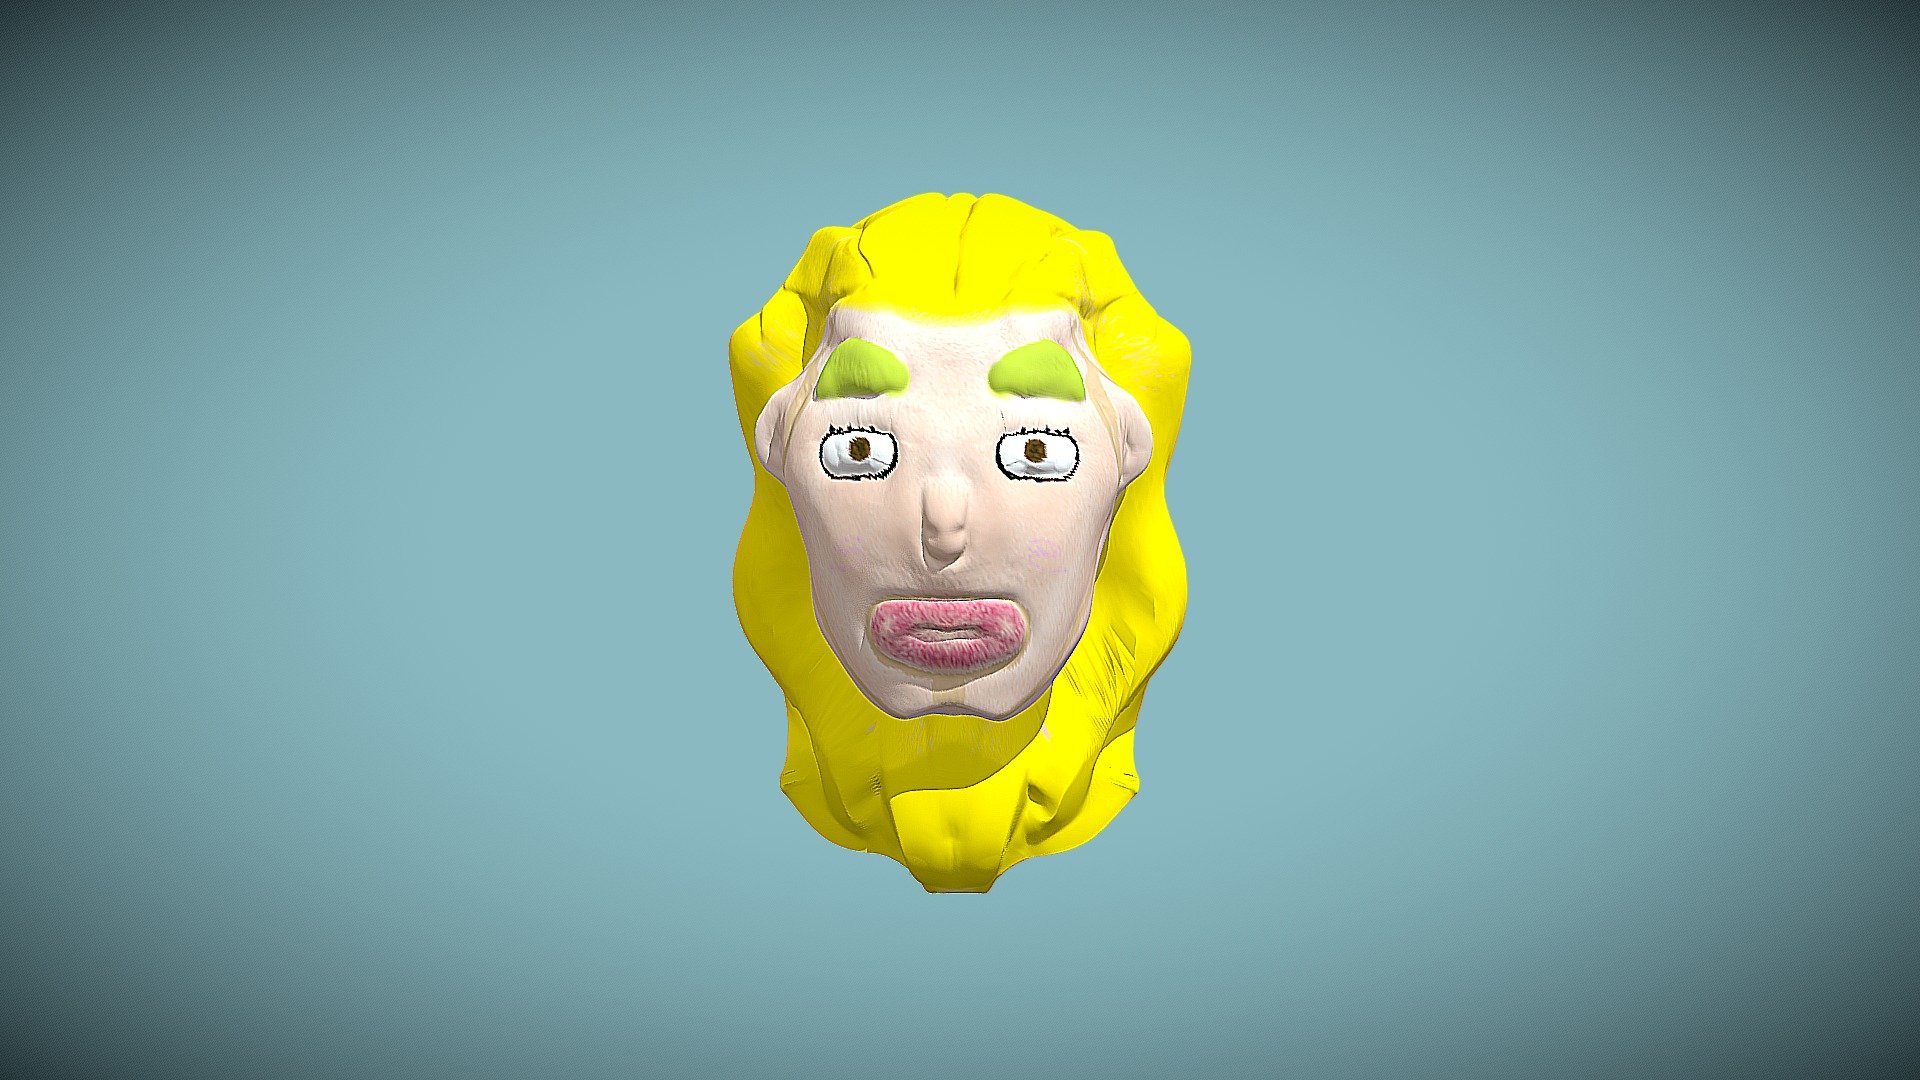 This 3d model is a cartoon character's face. The model itself was made in the sculptgl website as well as the texture. This model is free to download and use in any kind of personal or professional project with no need for any kind of licence or credit 3d model